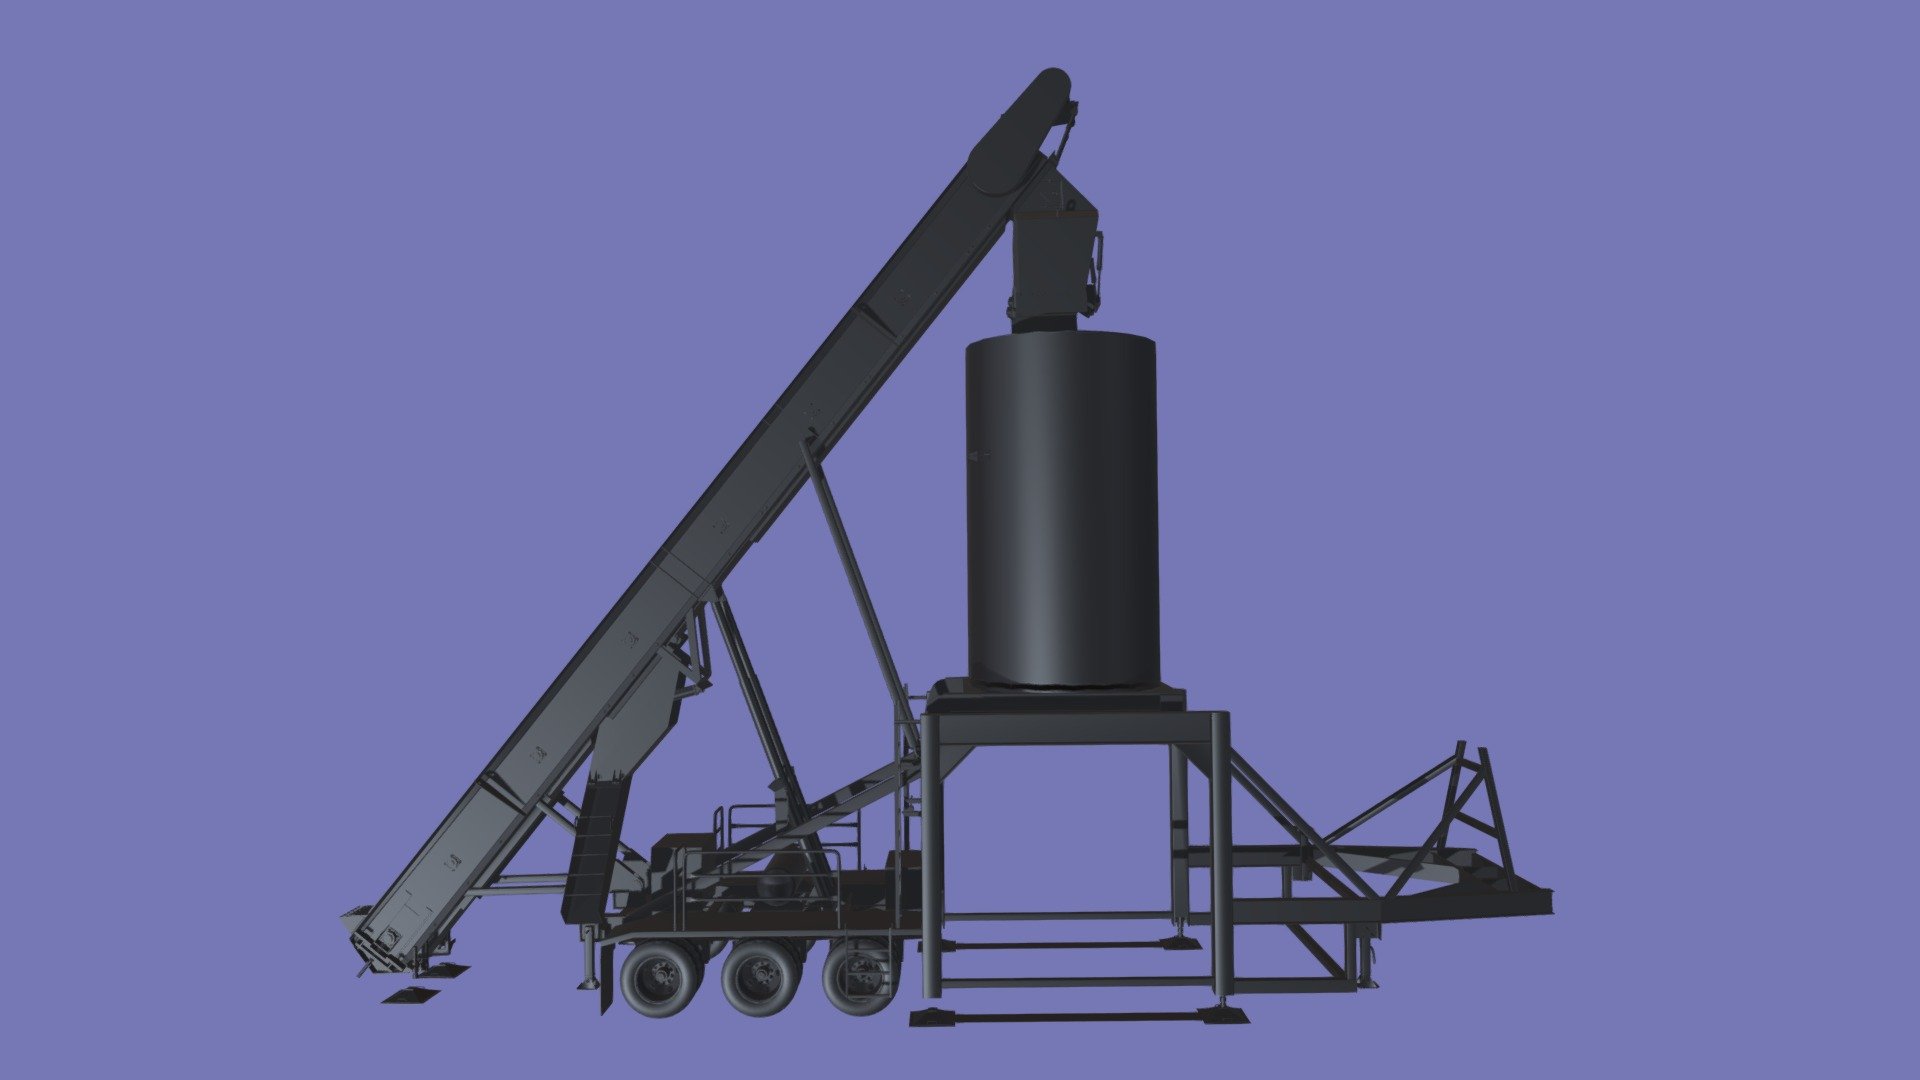 Low/mid poly model of the part of  Mobile asphalt plant - Mobile asphalt plant - 3D model by Yana8601 3d model